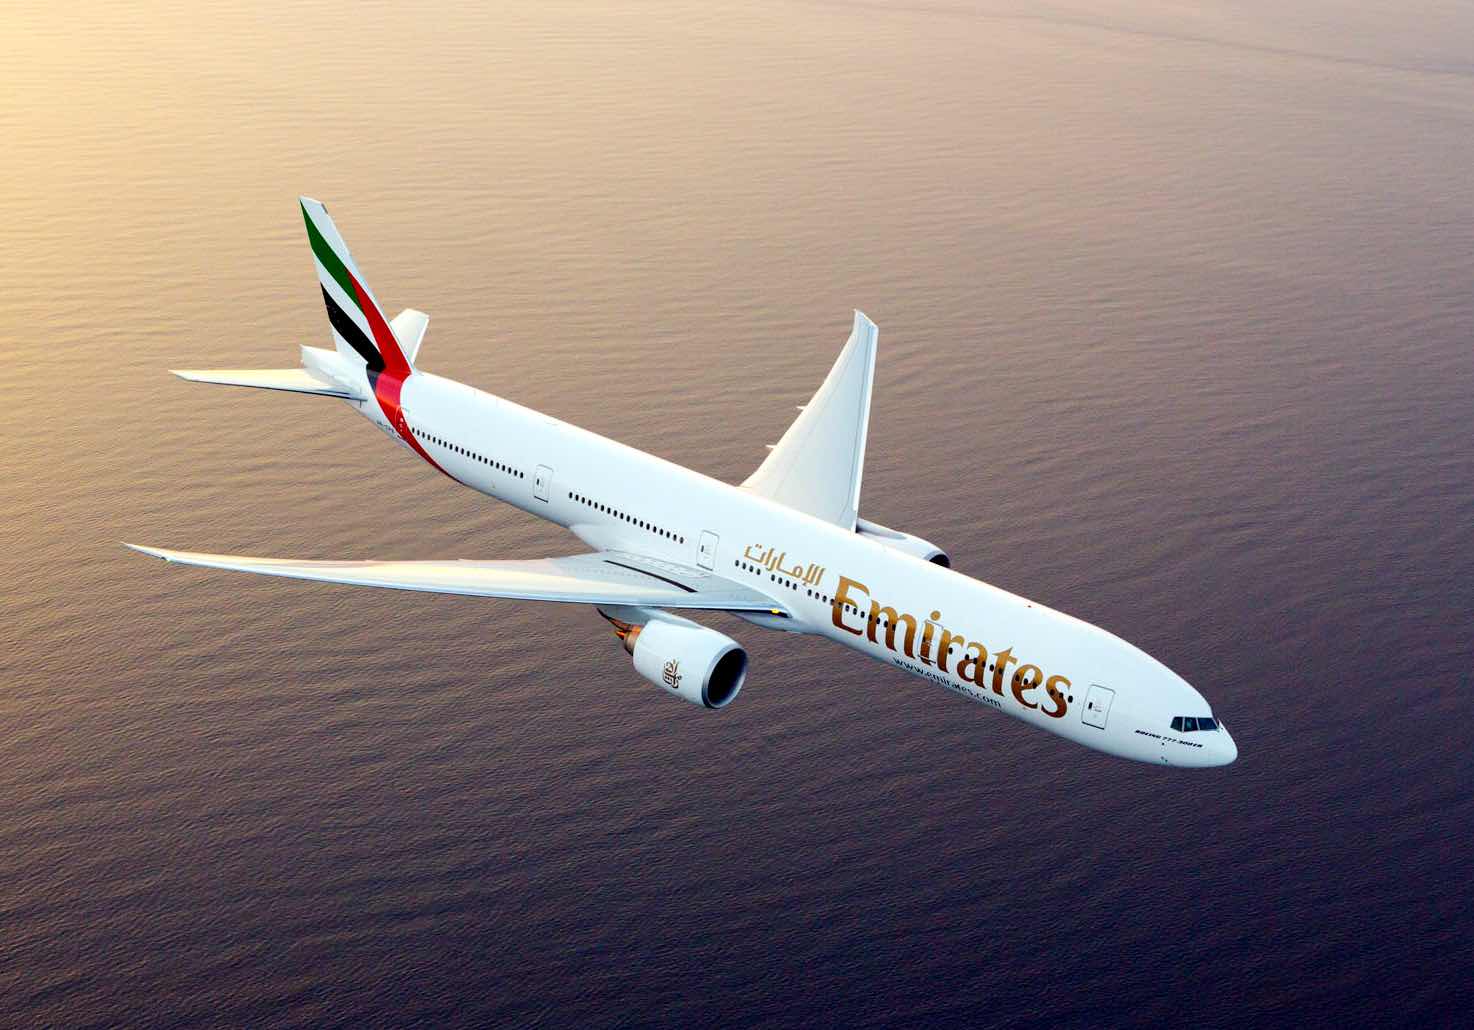 Did An Emirates Boeing 777 Nearly Crash Taking Off From Dubai?